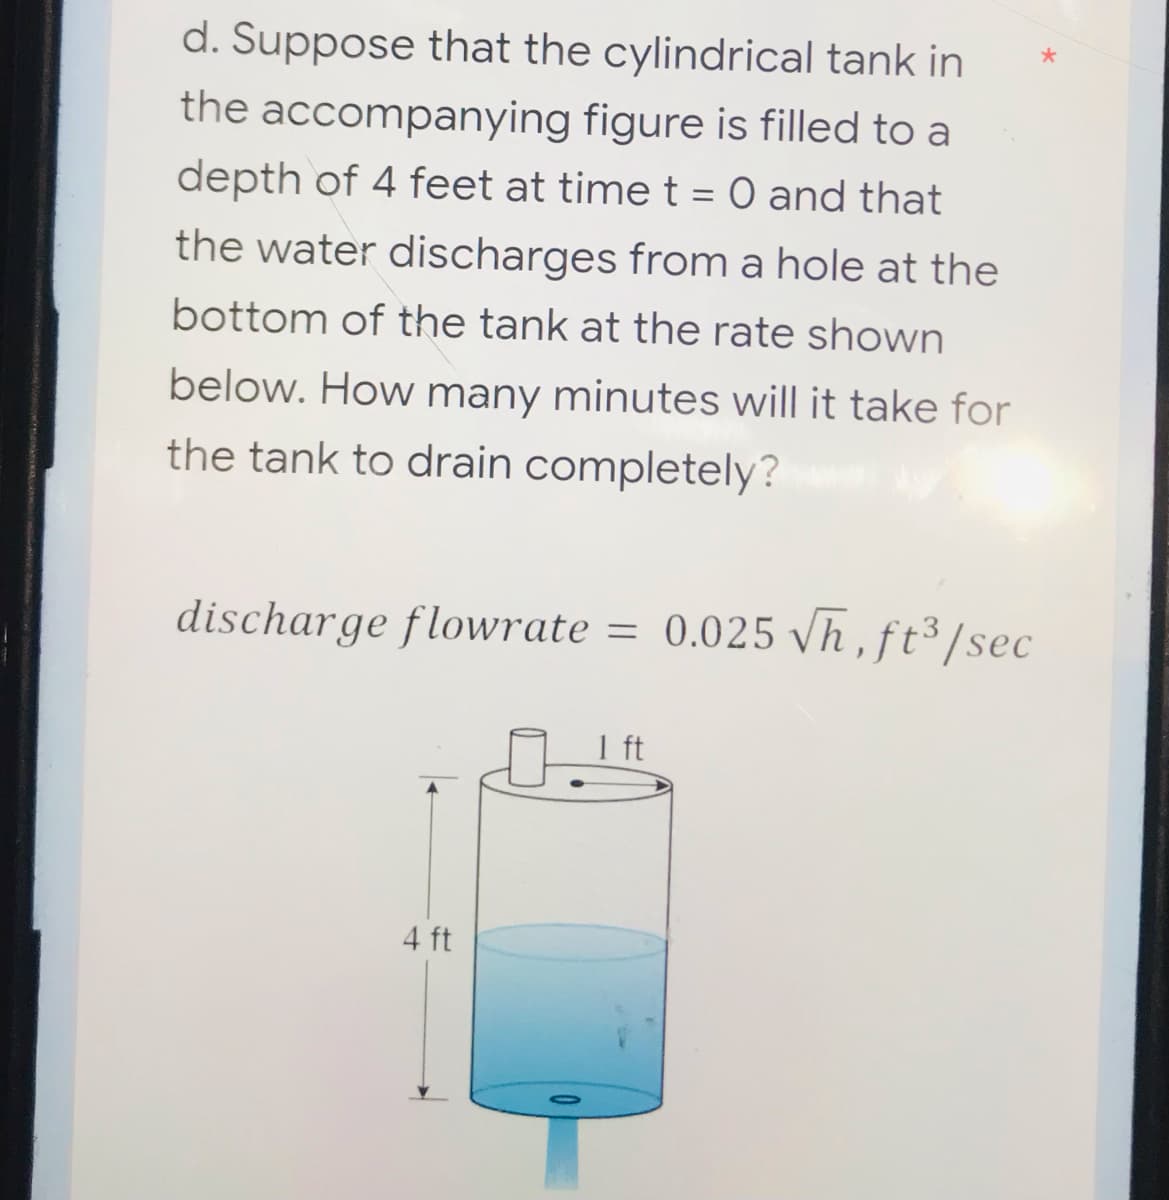 d. Suppose that the cylindrical tank in
the accompanying figure is filled to a
depth of 4 feet at time t = 0 and that
the water discharges from a hole at the
bottom of the tank at the rate shown
below. How many minutes will it take for
the tank to drain completely?
discharge flowrate = 0.025 √h, ft³/sec
=
4 ft
1 ft
*